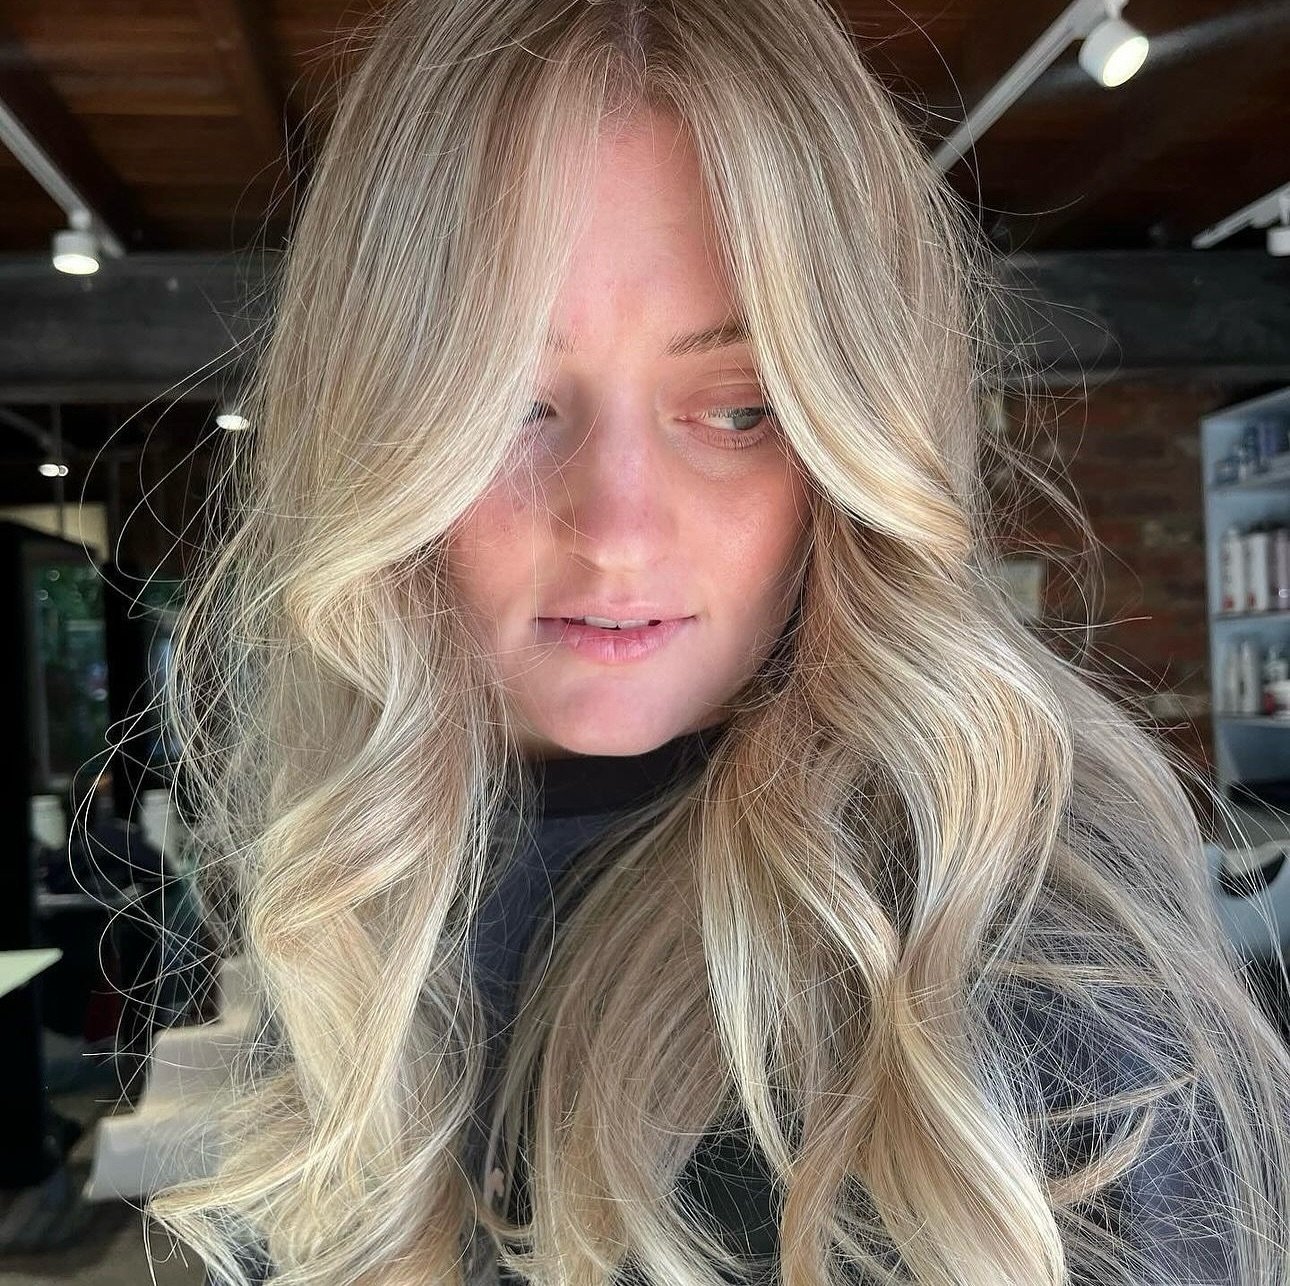 Introducing the Gigi special! Her technique in her Foilayage foils with the added tip is honestly effortless! The perfect grow out for the clients that want the low maintenance grow out while being a bright blonde 

Coloured &amp; Styled - Gigi

For 